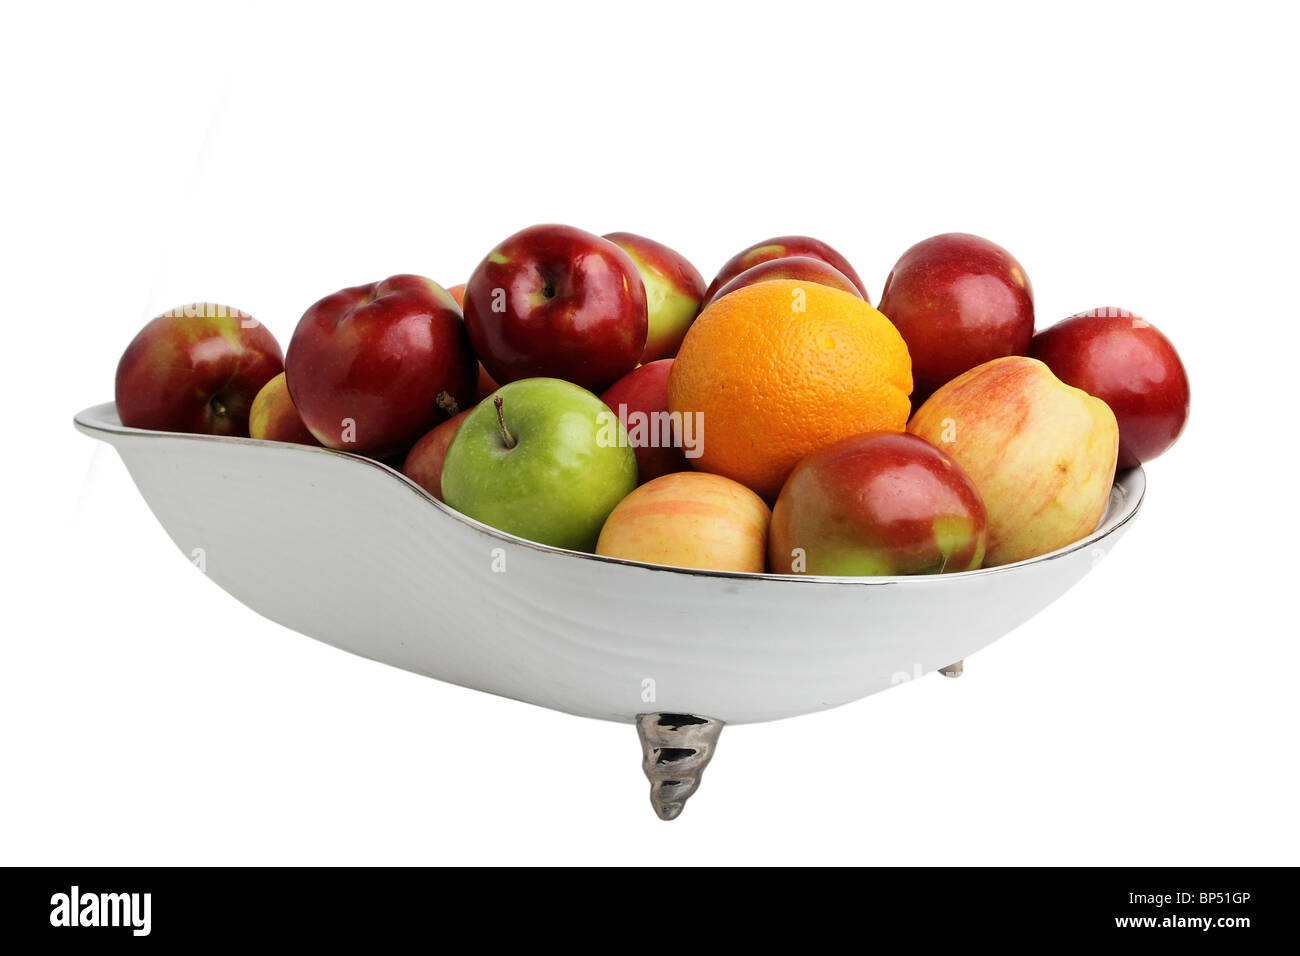 Elegant Basket with Apples and an Orange Stock Photo